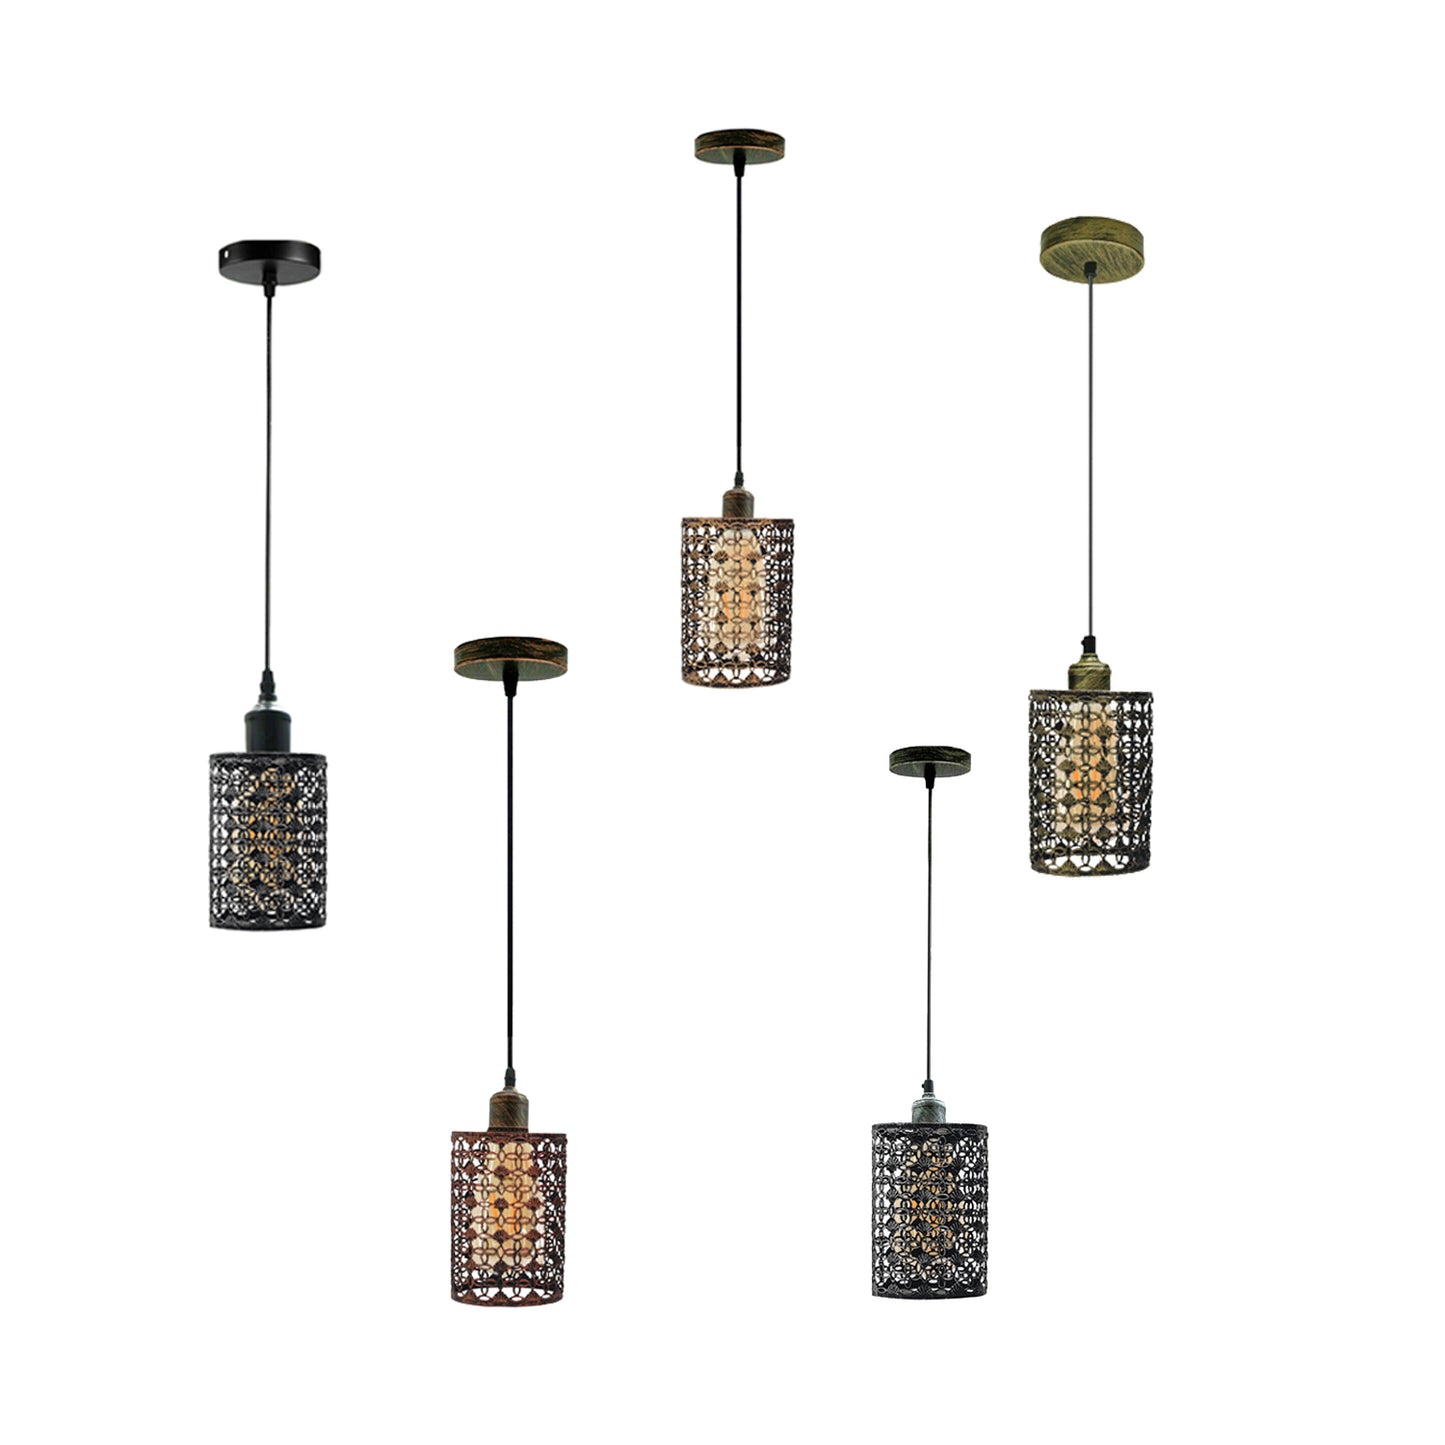 Modern cylinder cage ceiling pendant Lamp Shades